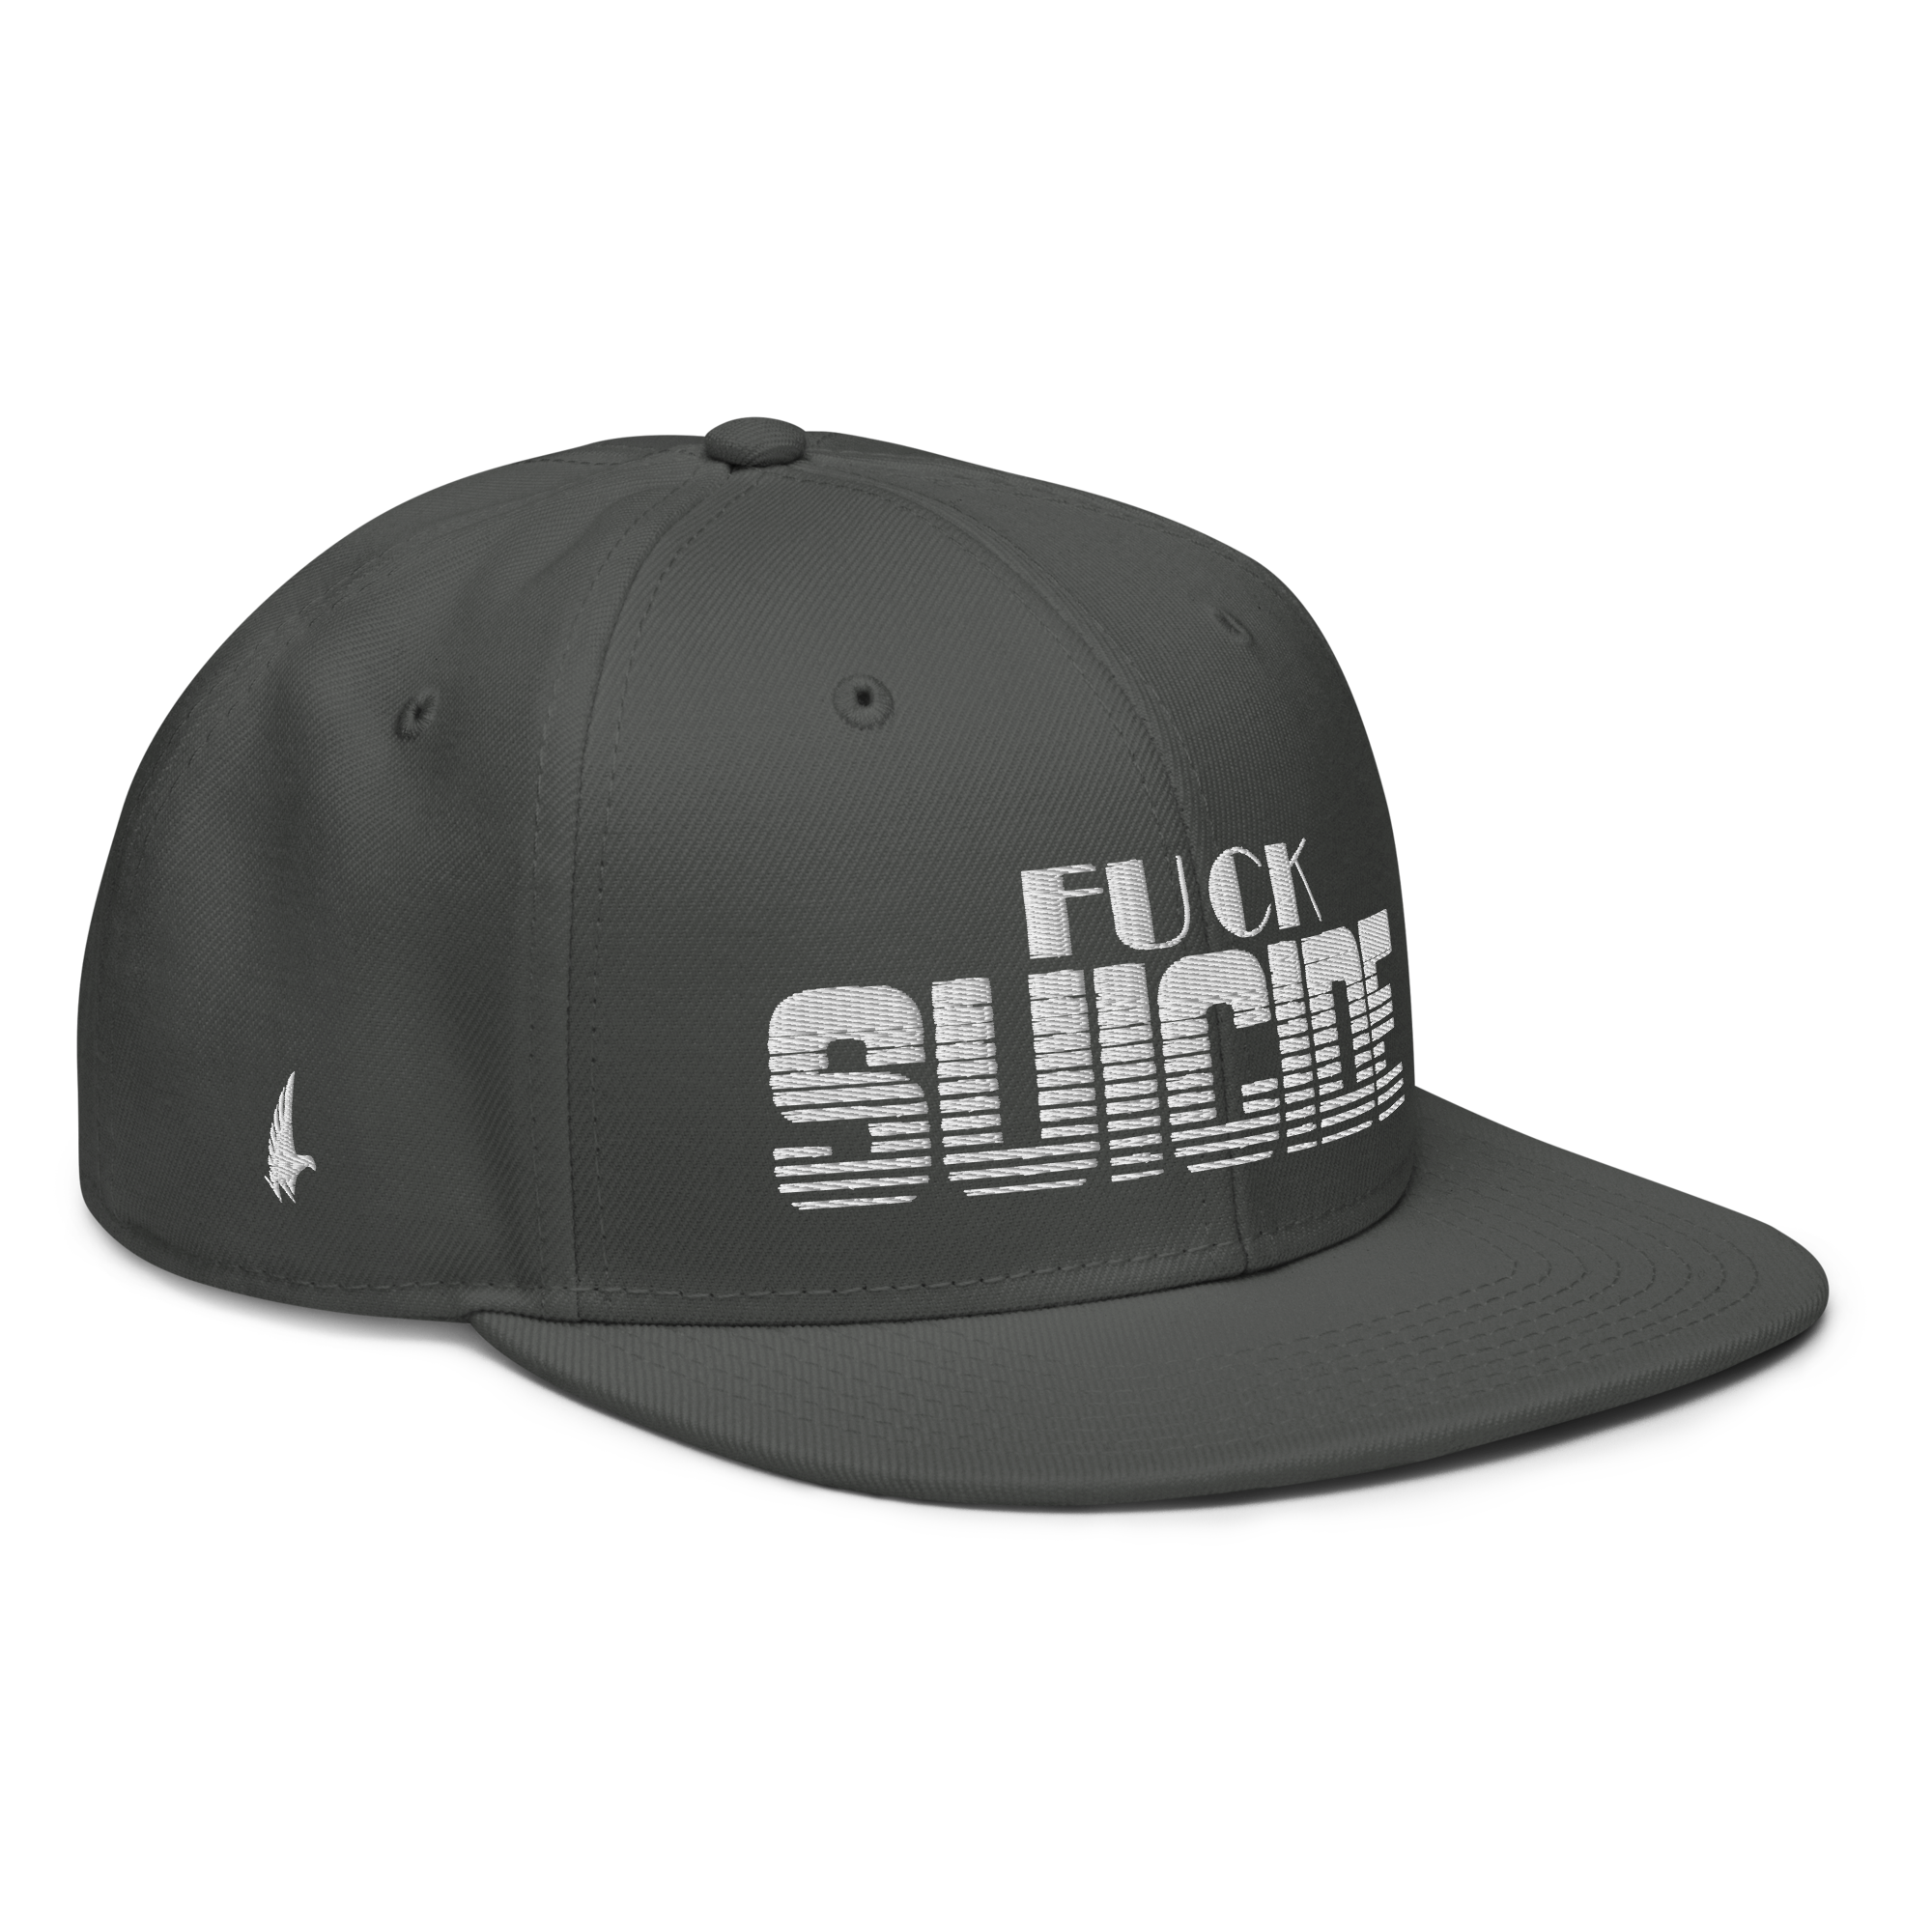 Fk Suicide Snapback Hat - Charcoal Grey OS - Loyalty Vibes